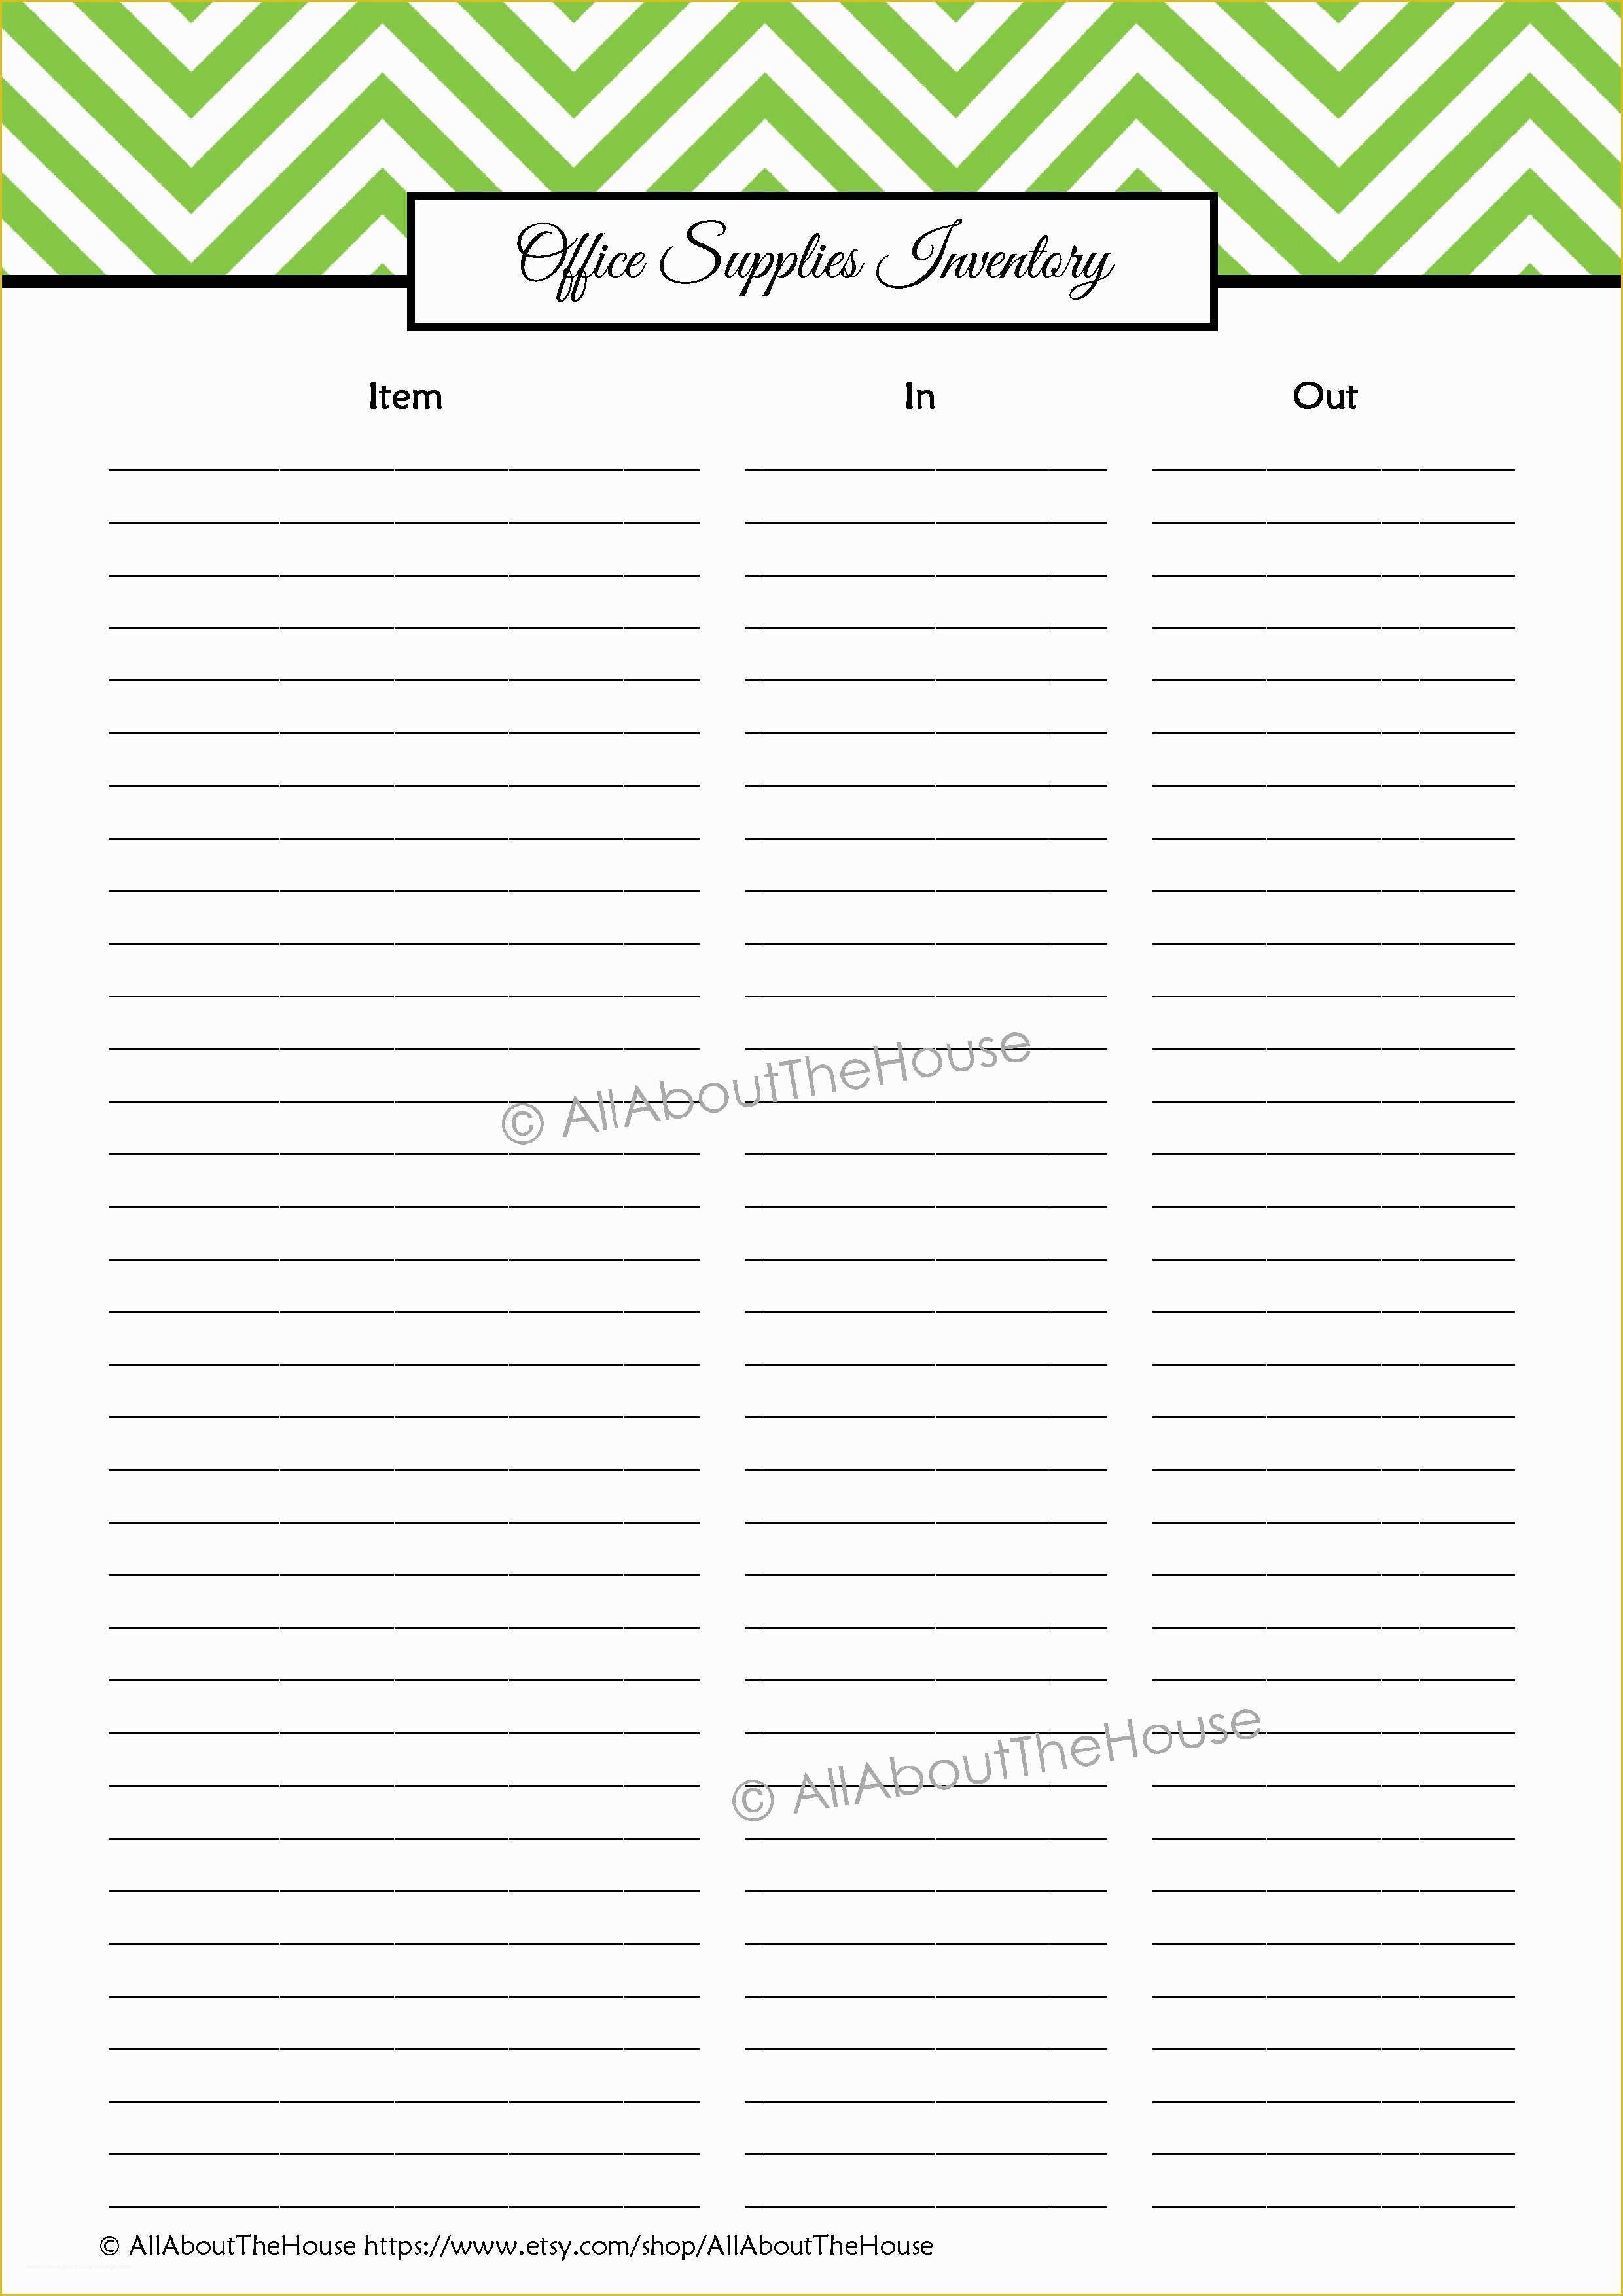 Free Office Supply List Template Of Fice Supplies Inventory Spreadsheet